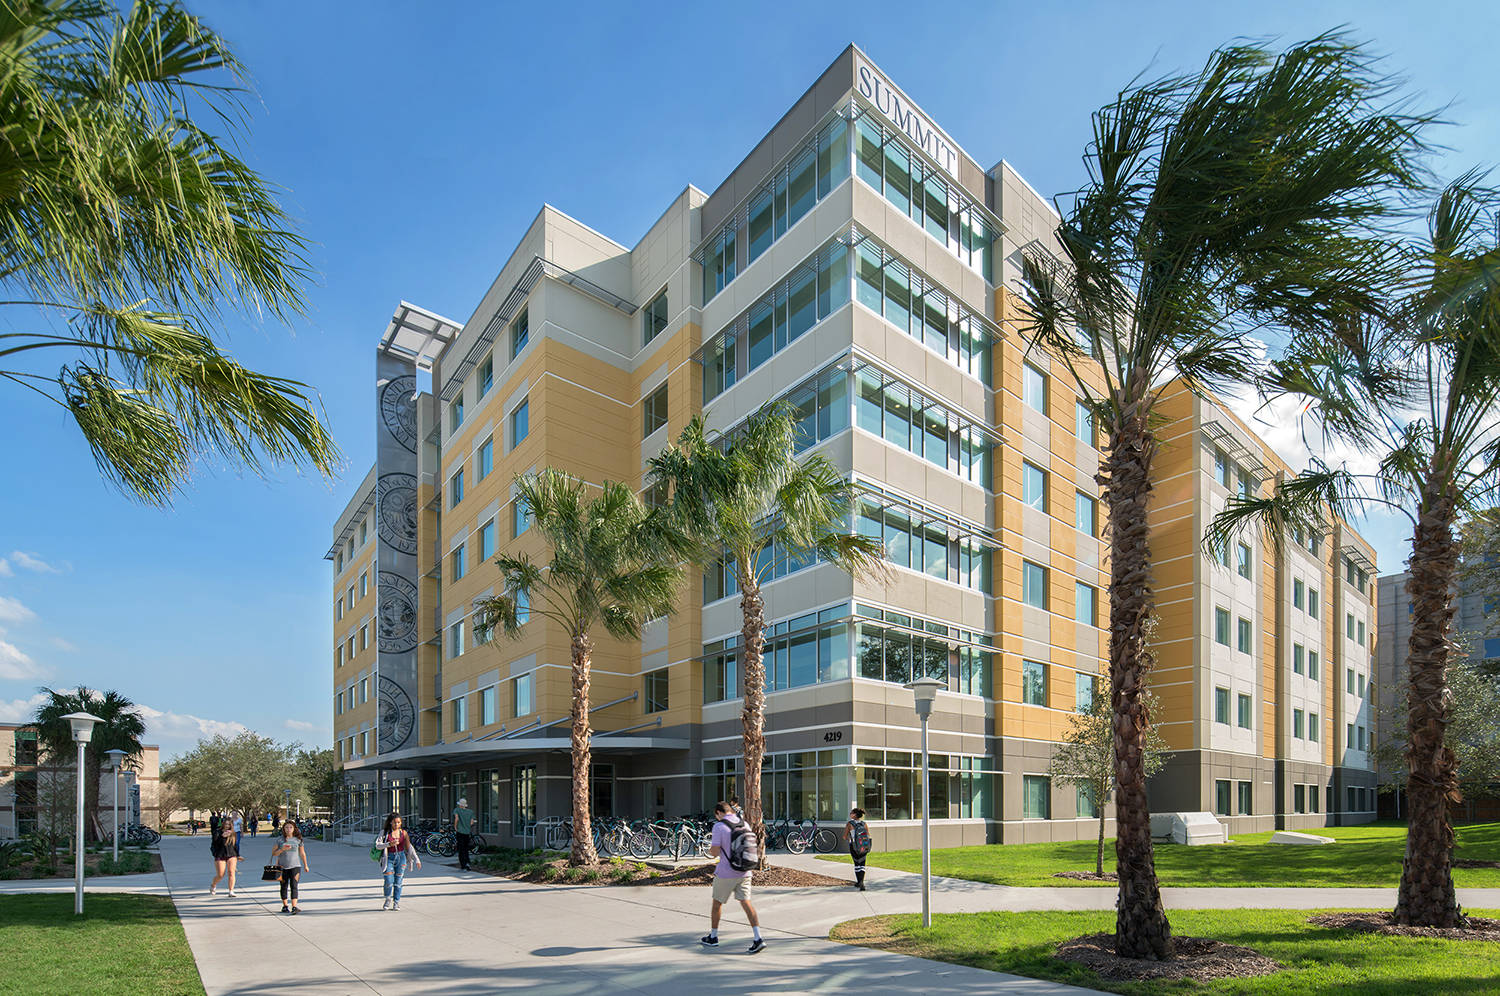 Majestic view of the Student Housing Village at University Of South Florida. Wallpaper